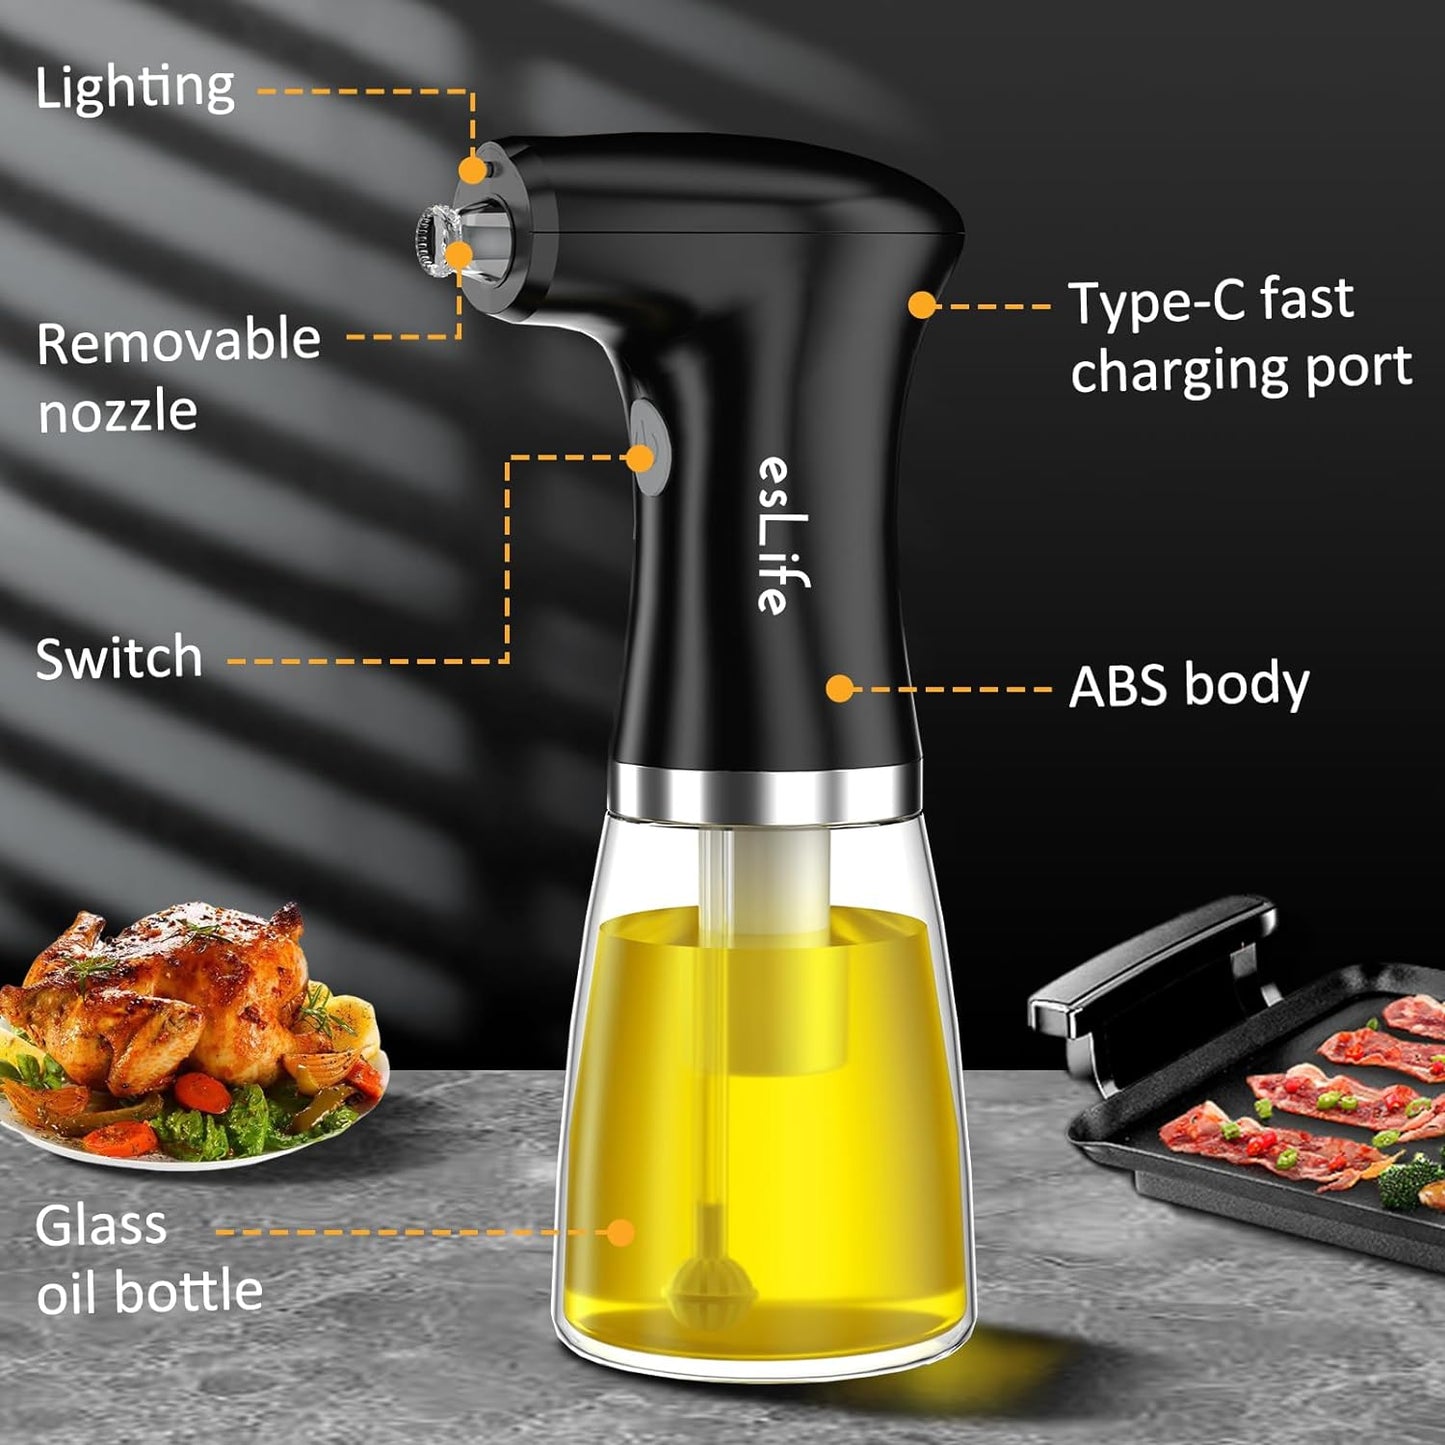 esLife Electric Oil Sprayer for Cooking, 8oz USB Rechargeable